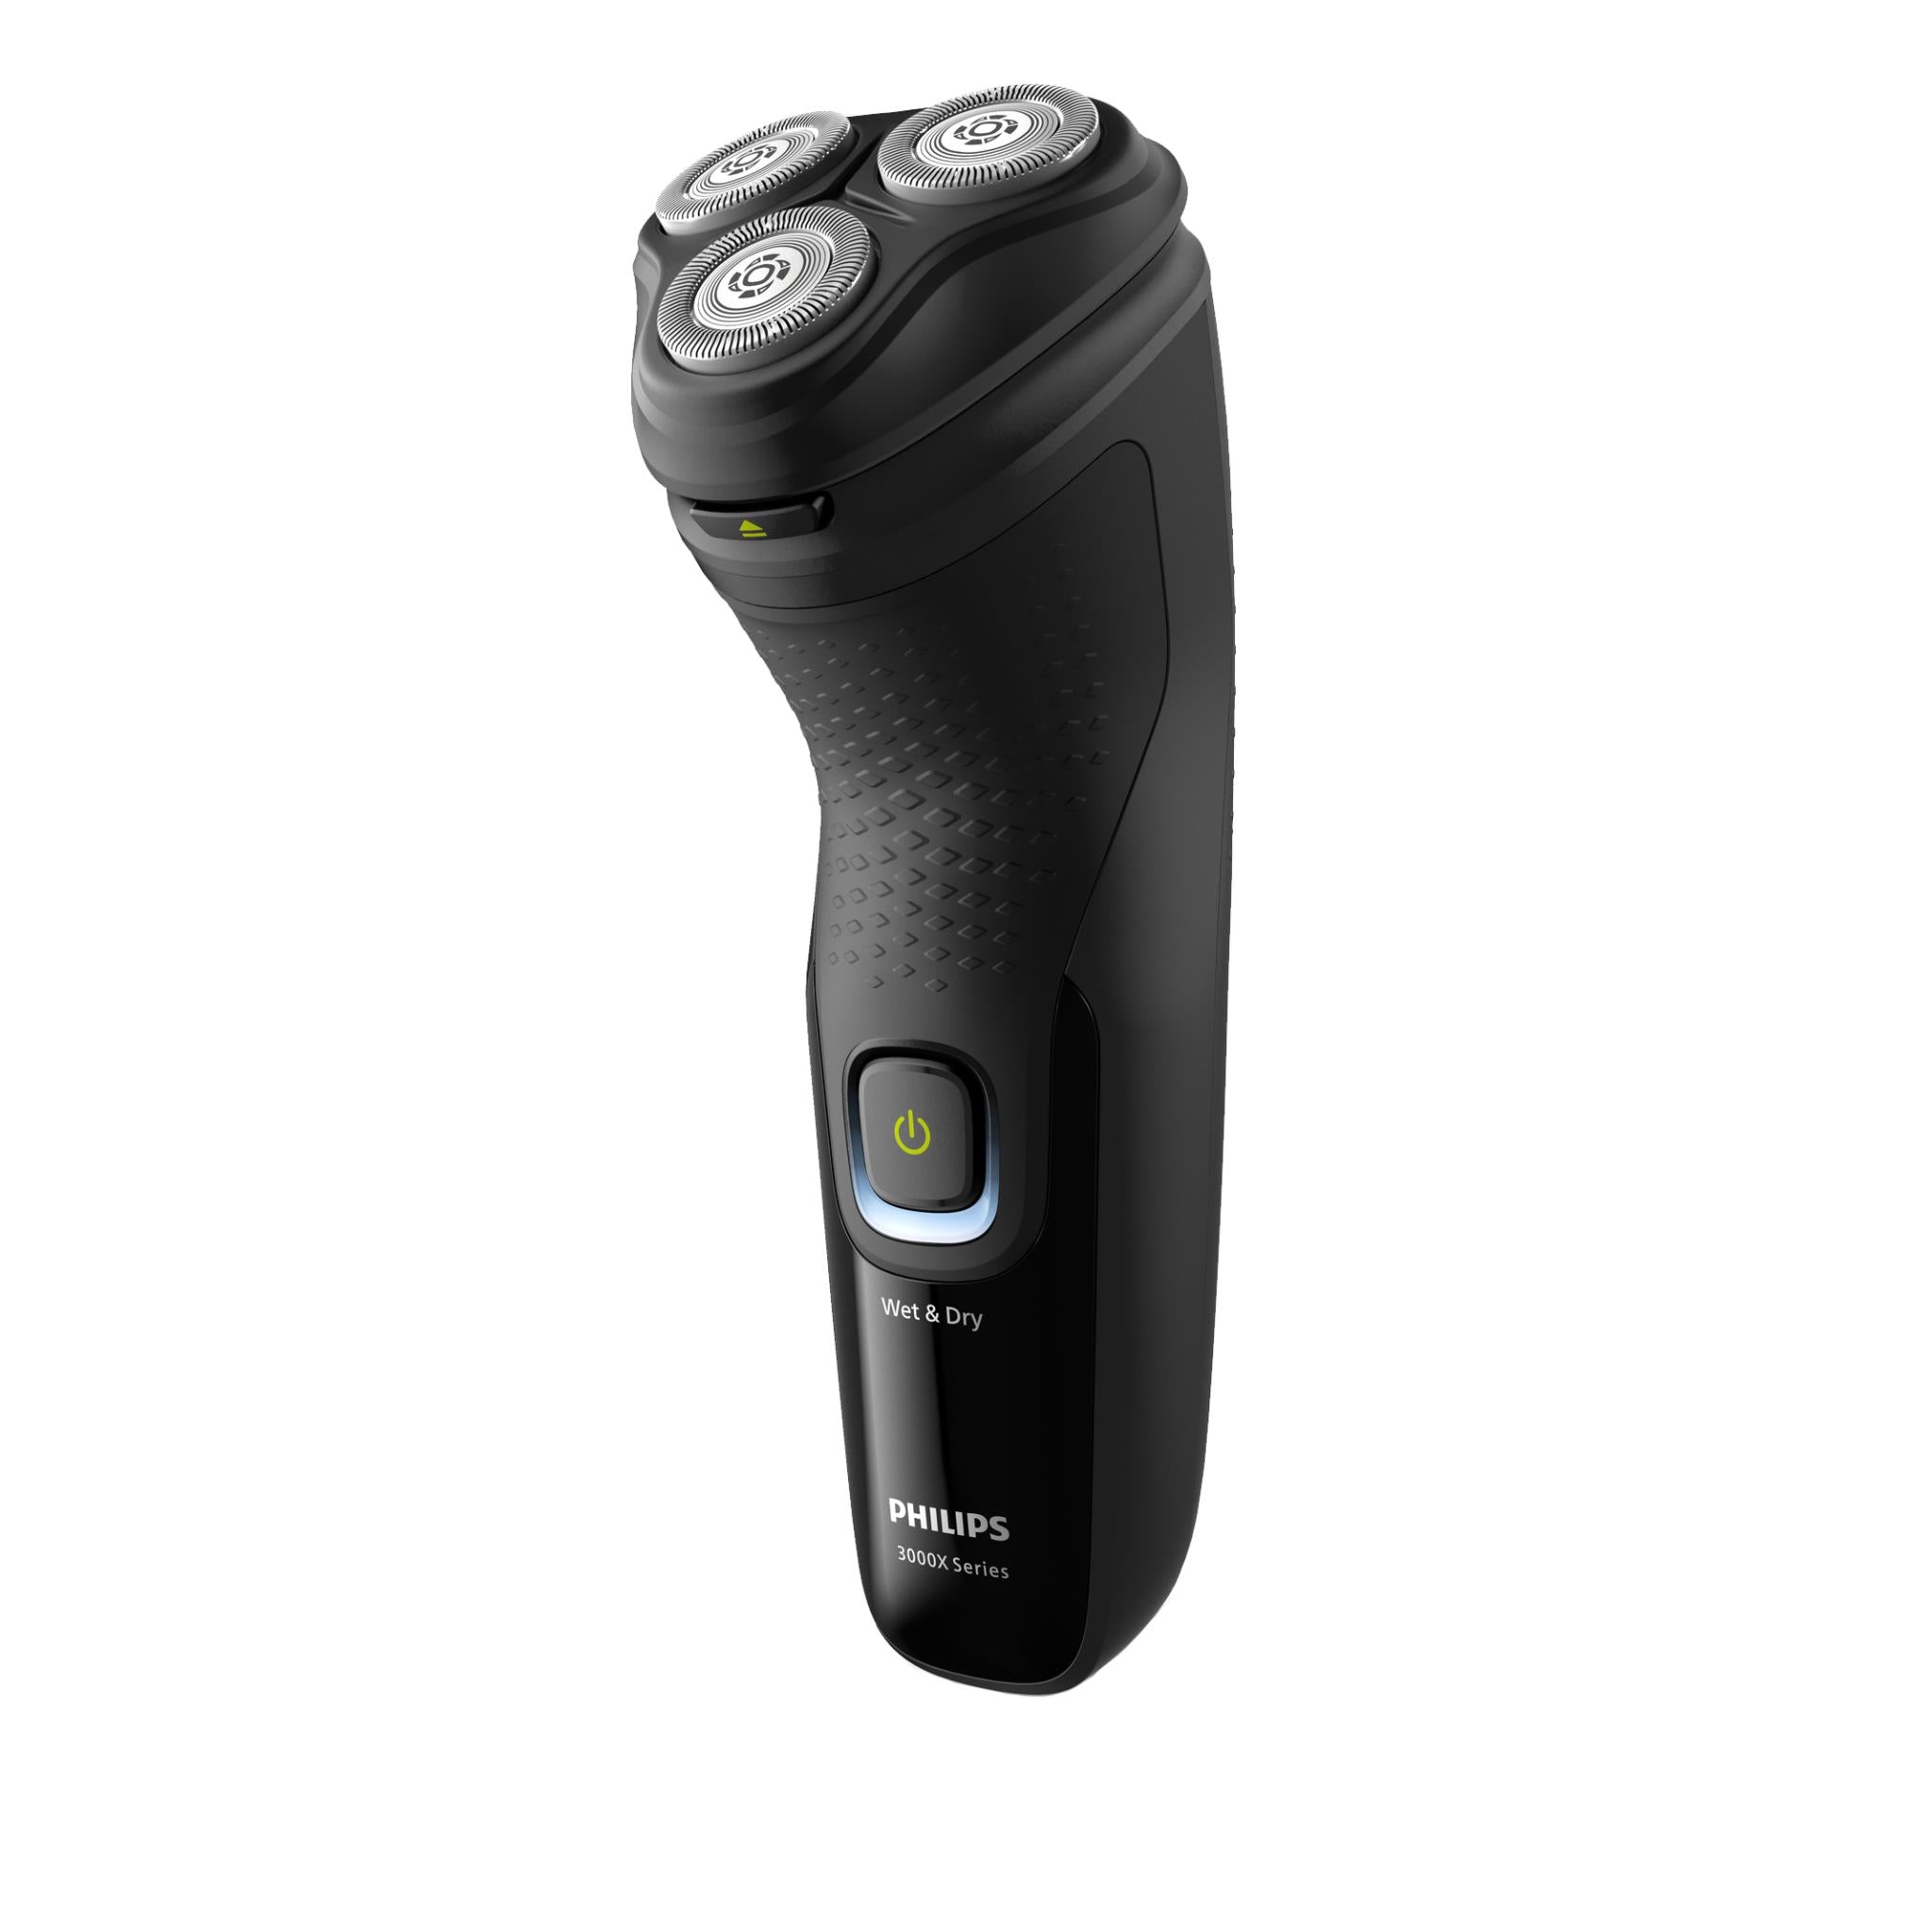 philips shaver 3000x series wet & dry electric shaver